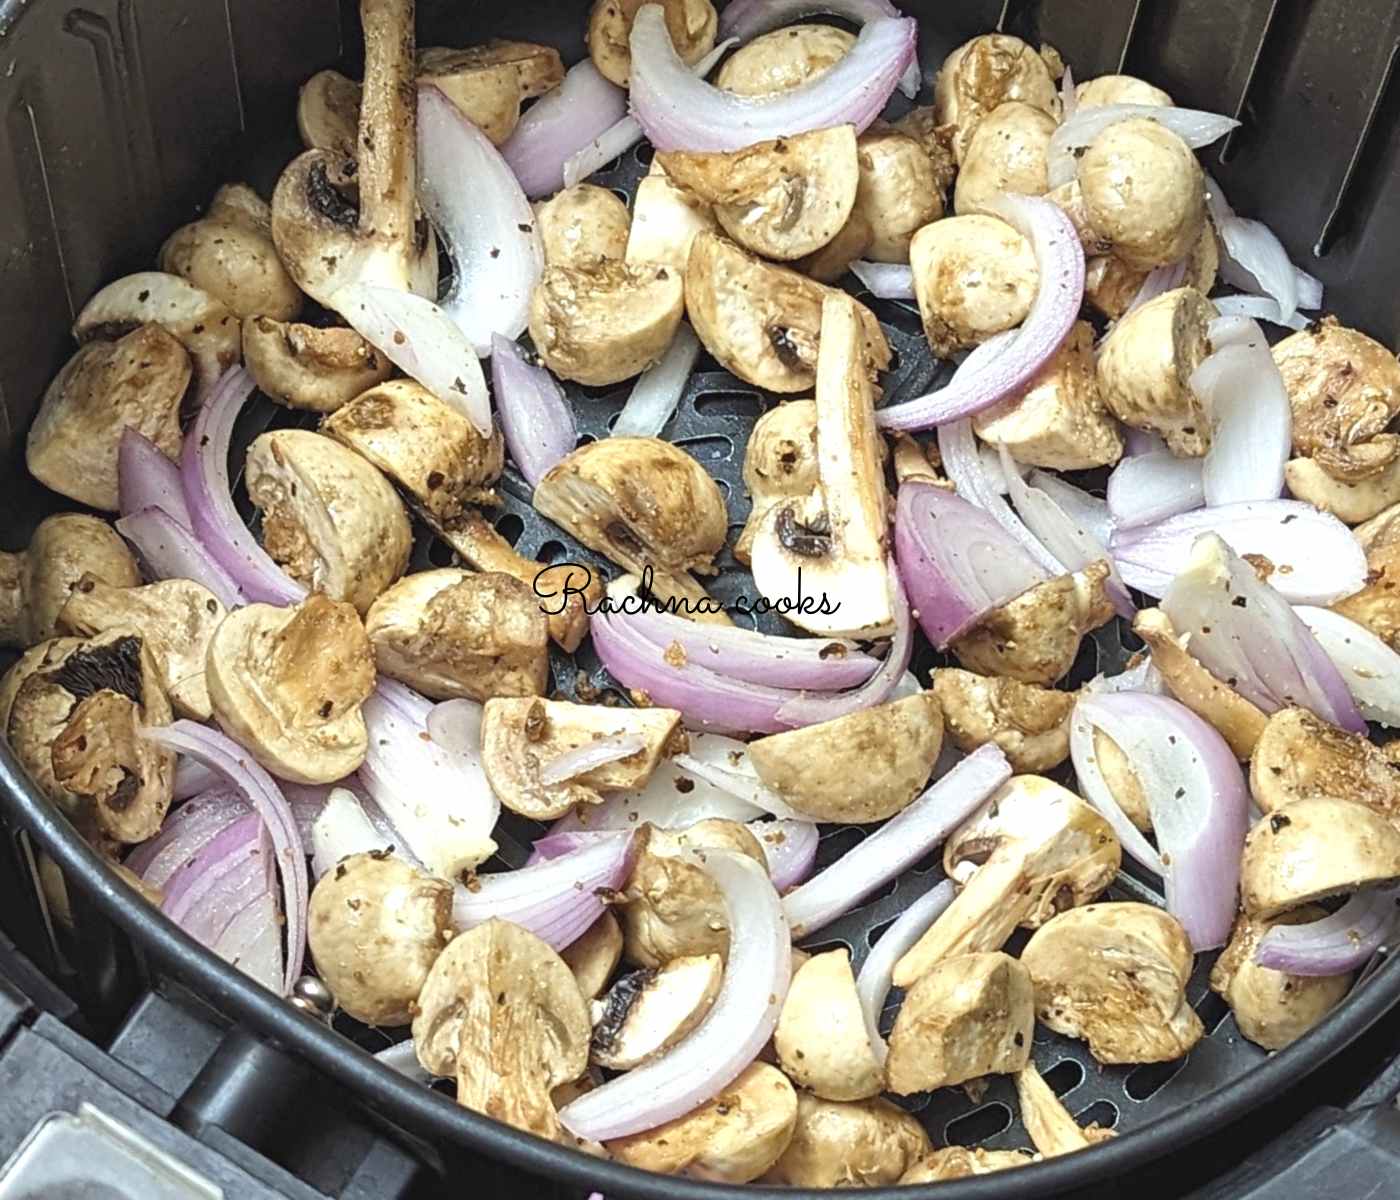 Mushrooms and onions in air fryer basket.